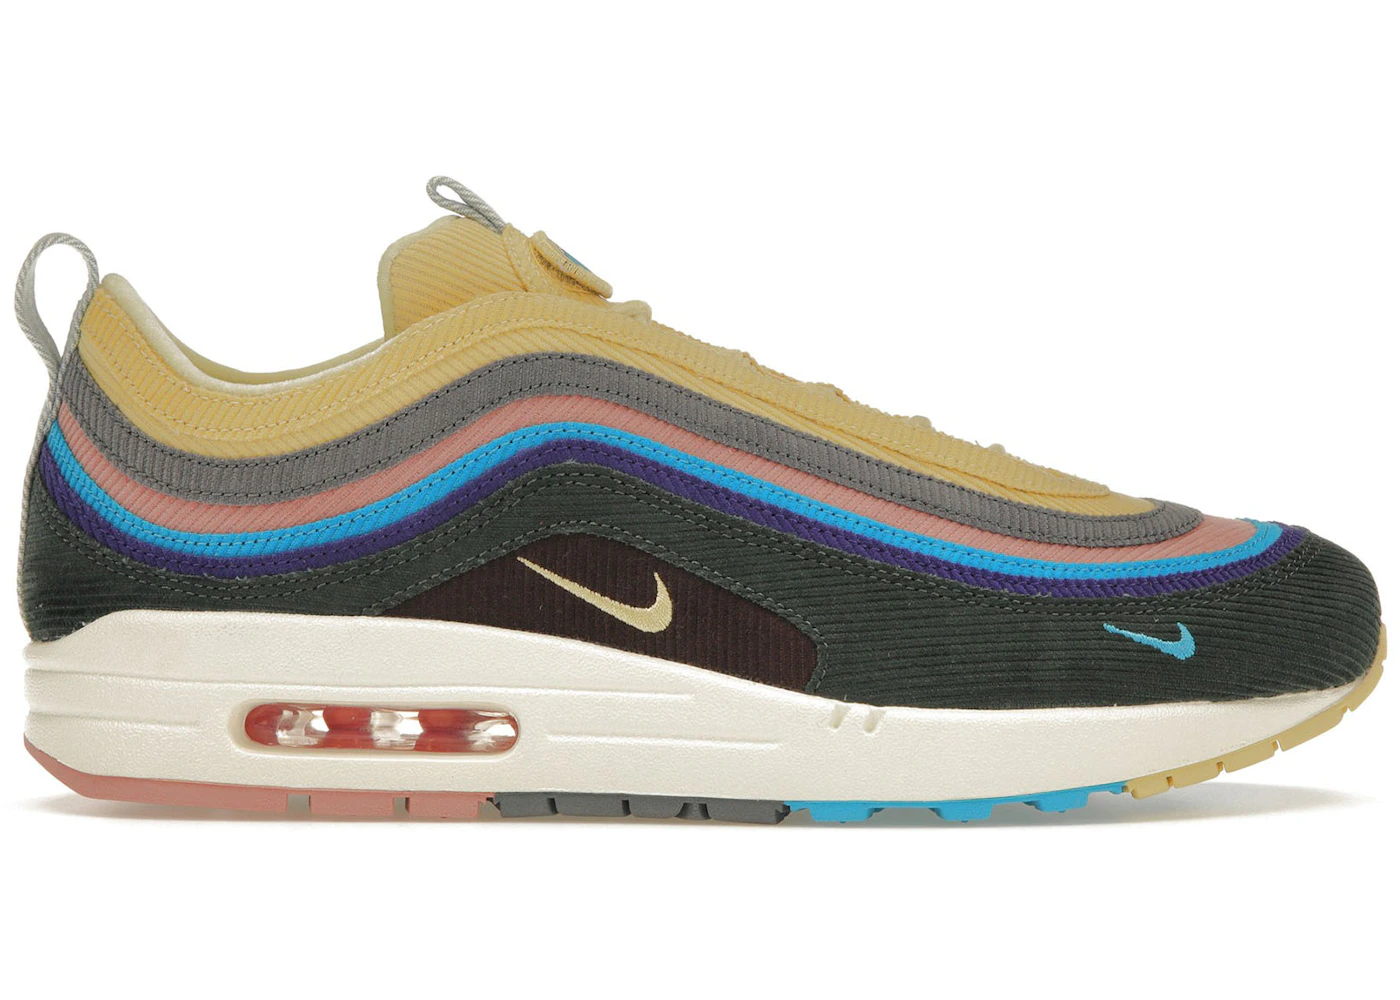 cocodrilo Humildad Diez Nike Air Max 1/97 Sean Wotherspoon (Extra Lace Set Only) - AJ4219-400 - US